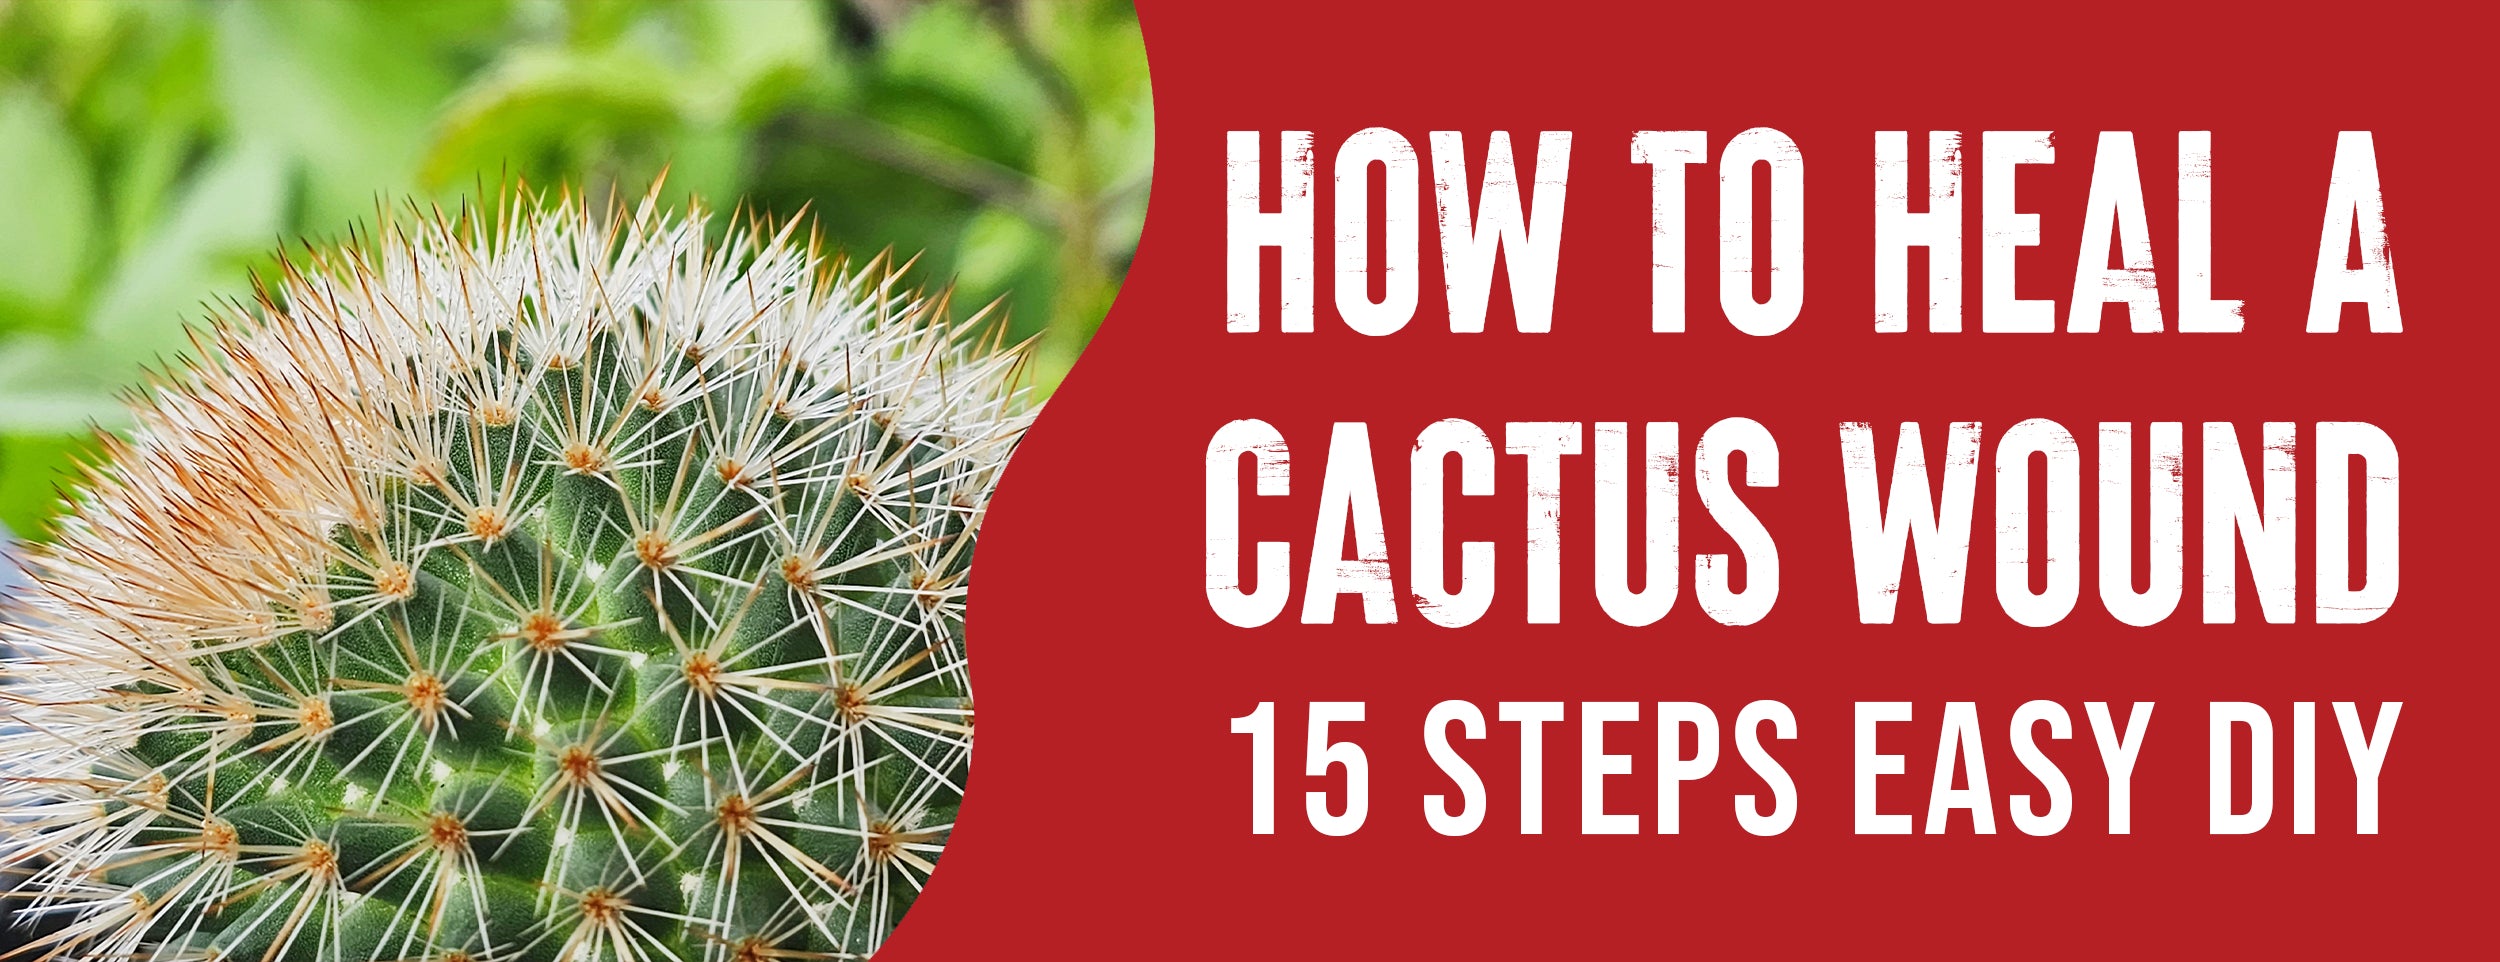 Here are 5 tips for healing a cactus wound and 4 for preventing one in the future